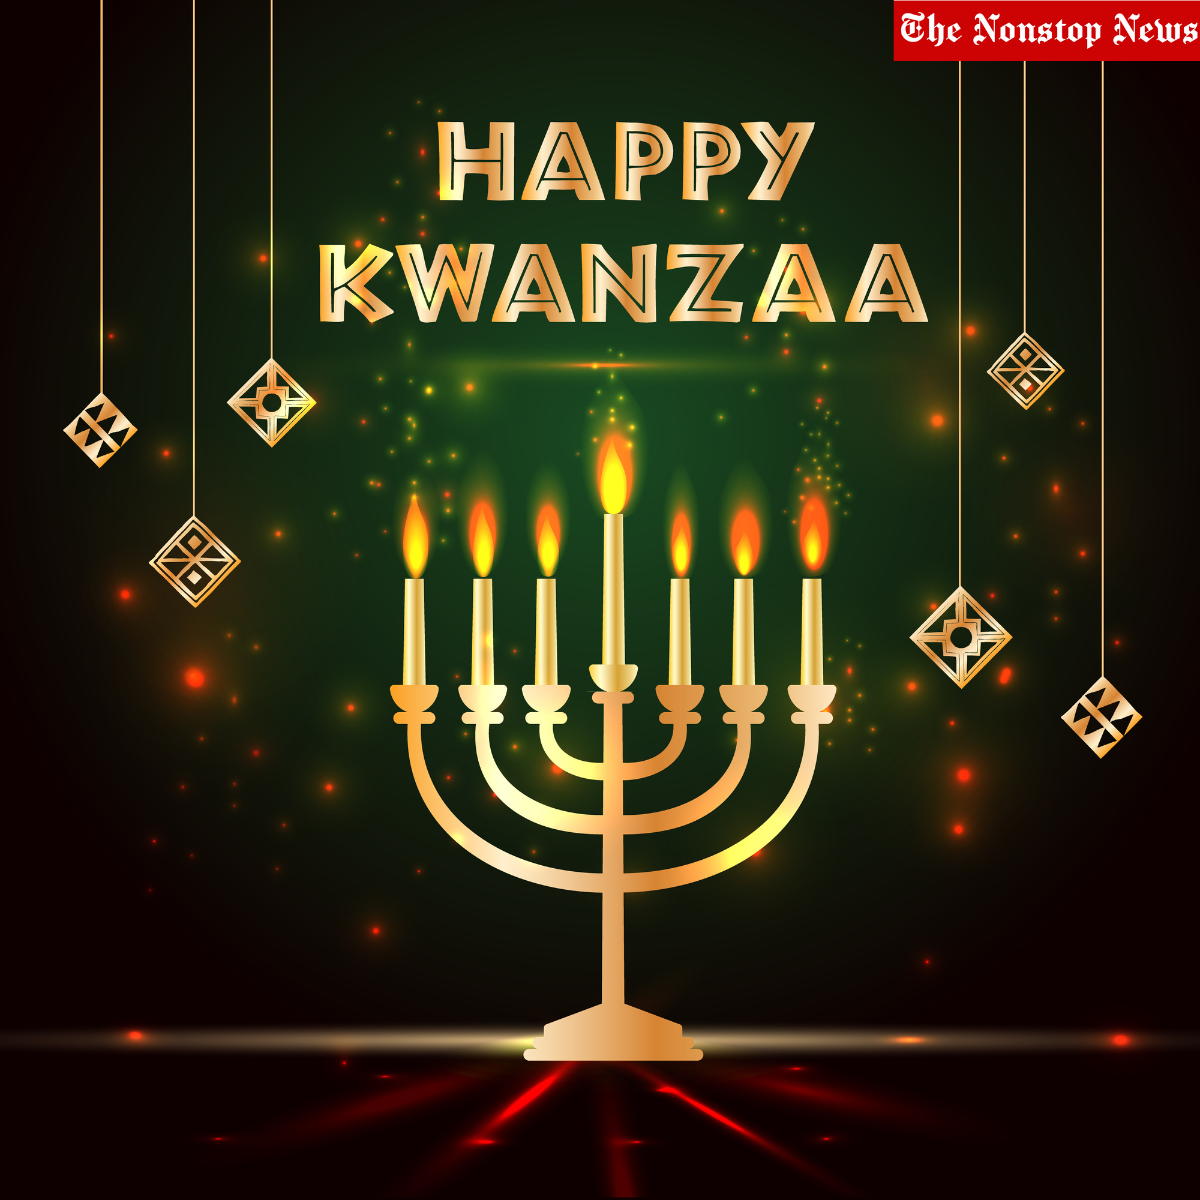 Kwanzaa 2022 Greetings, Messages, Images, Wishes, Quotes, Slogans, and Pictures